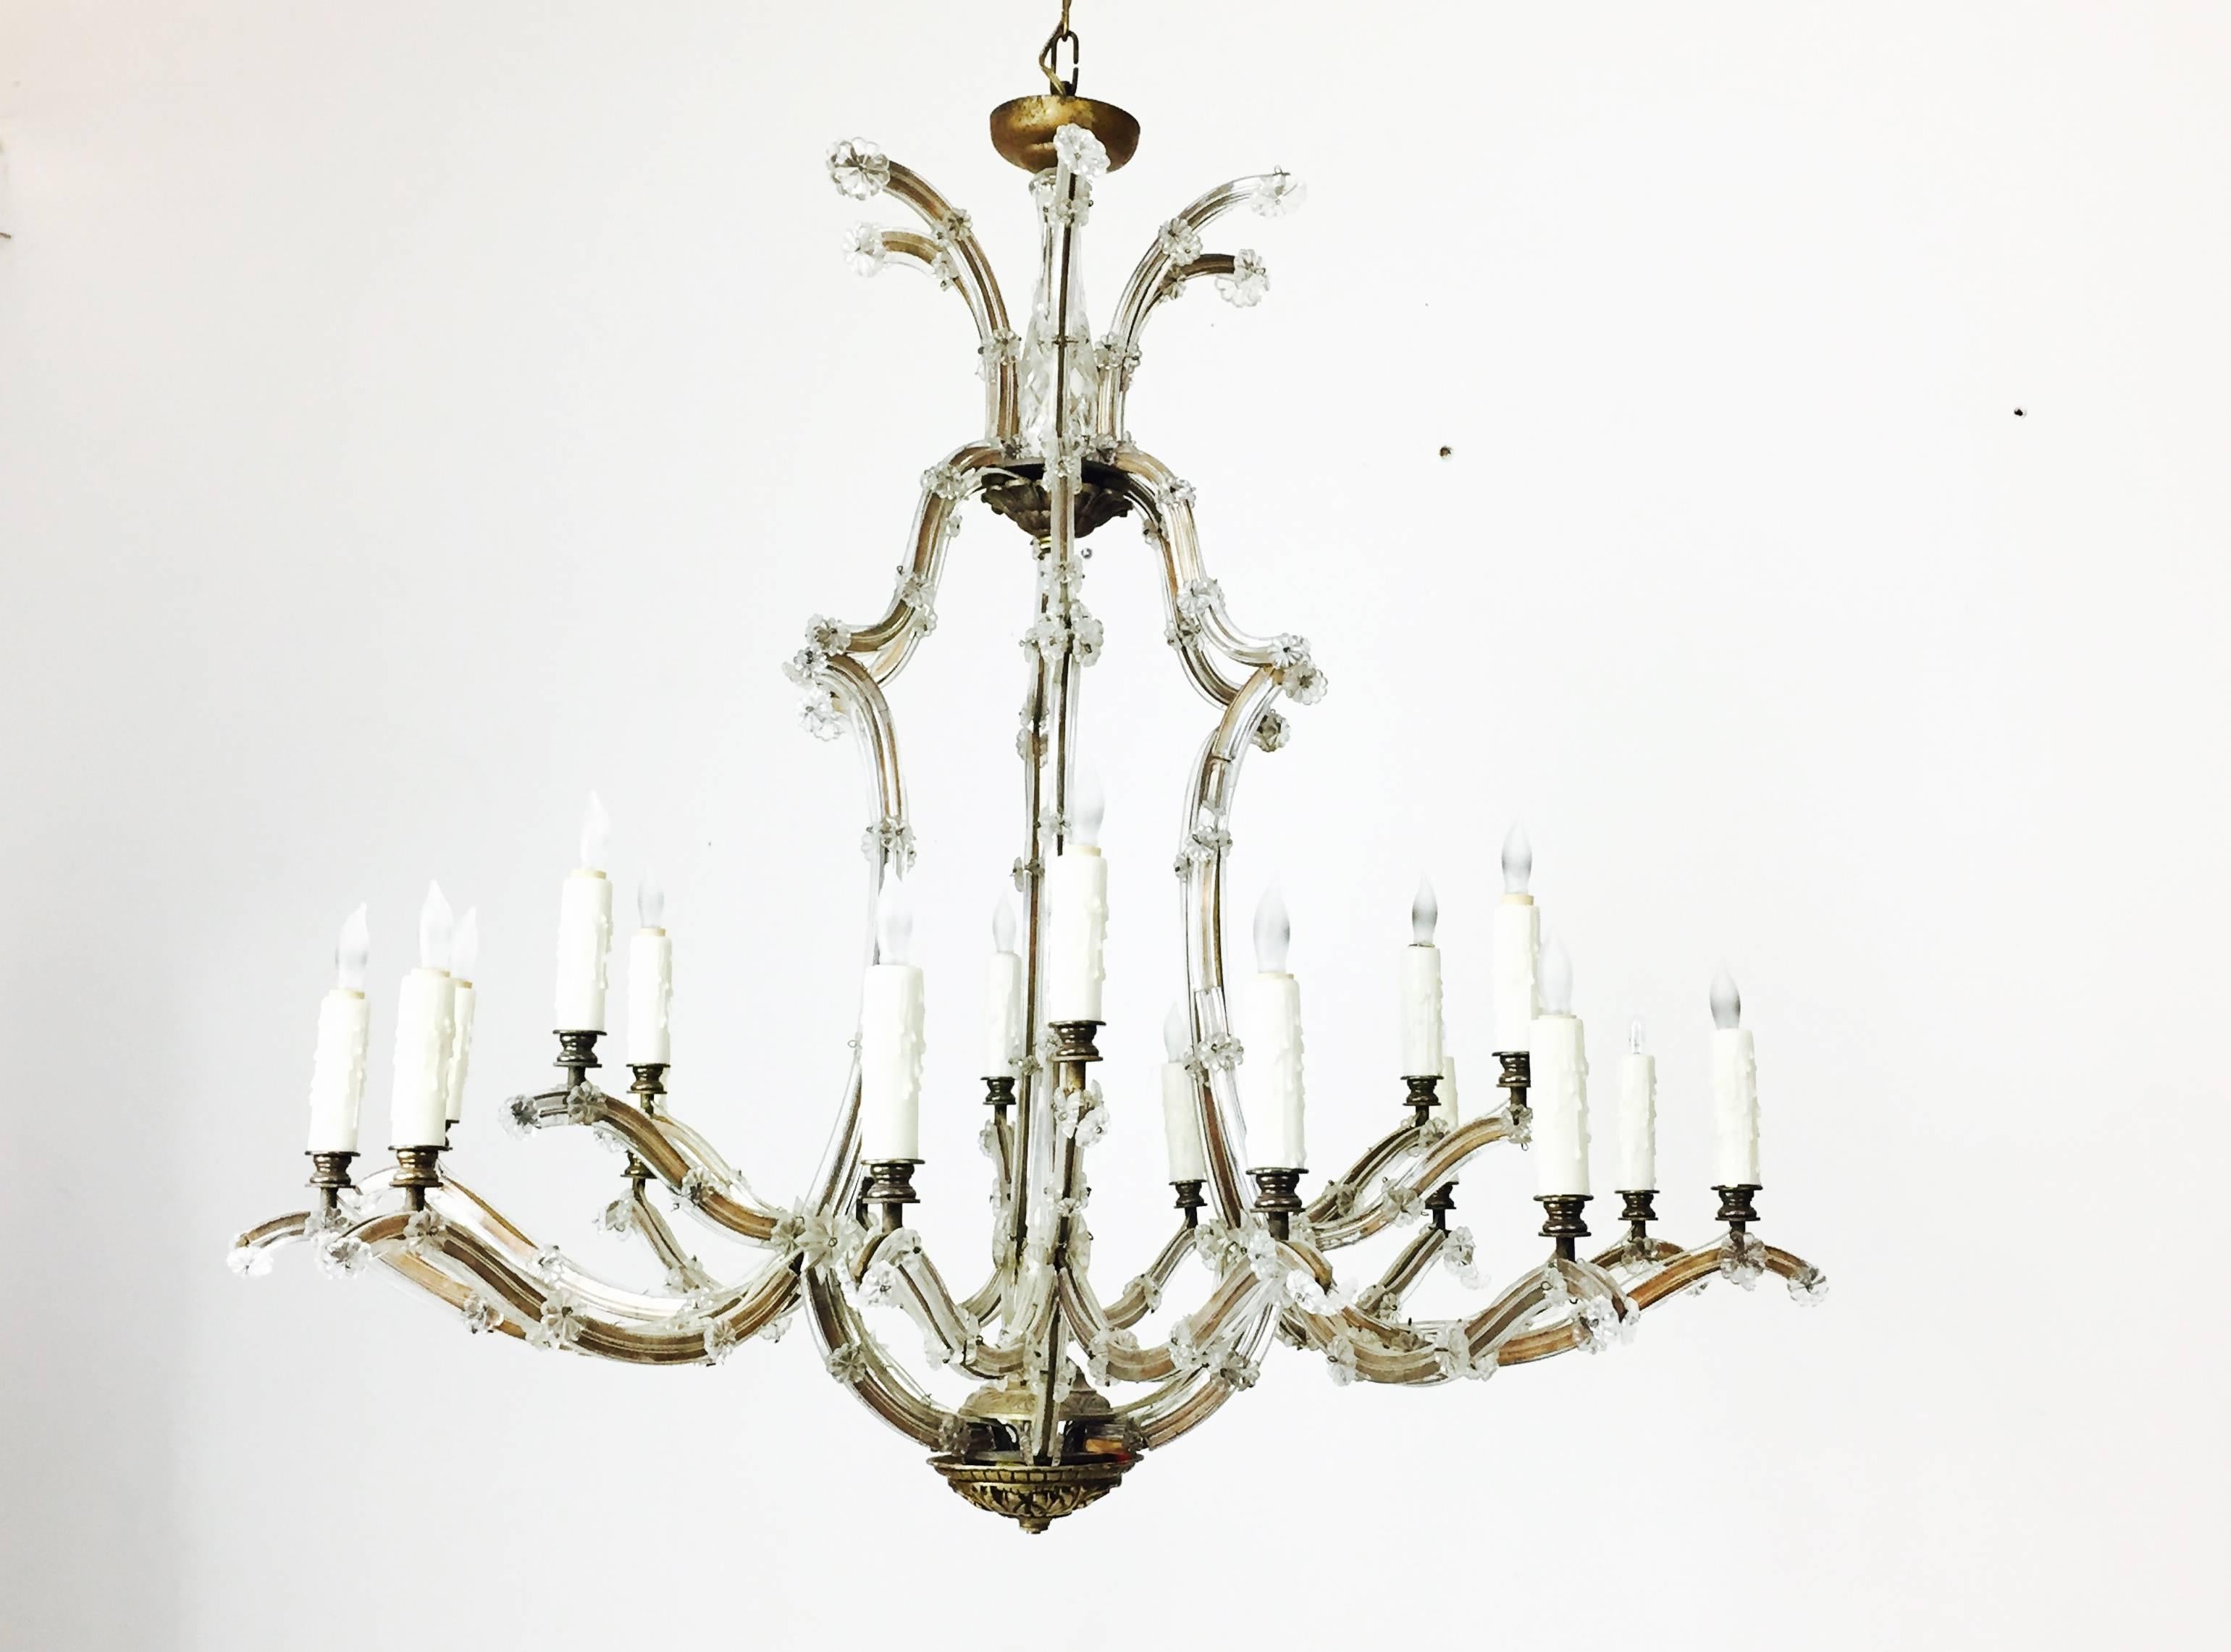 Maria Theresa gold and silver crystal chandelier. In good vintage condition with some breaks in the crystal.

Dimensions: 39